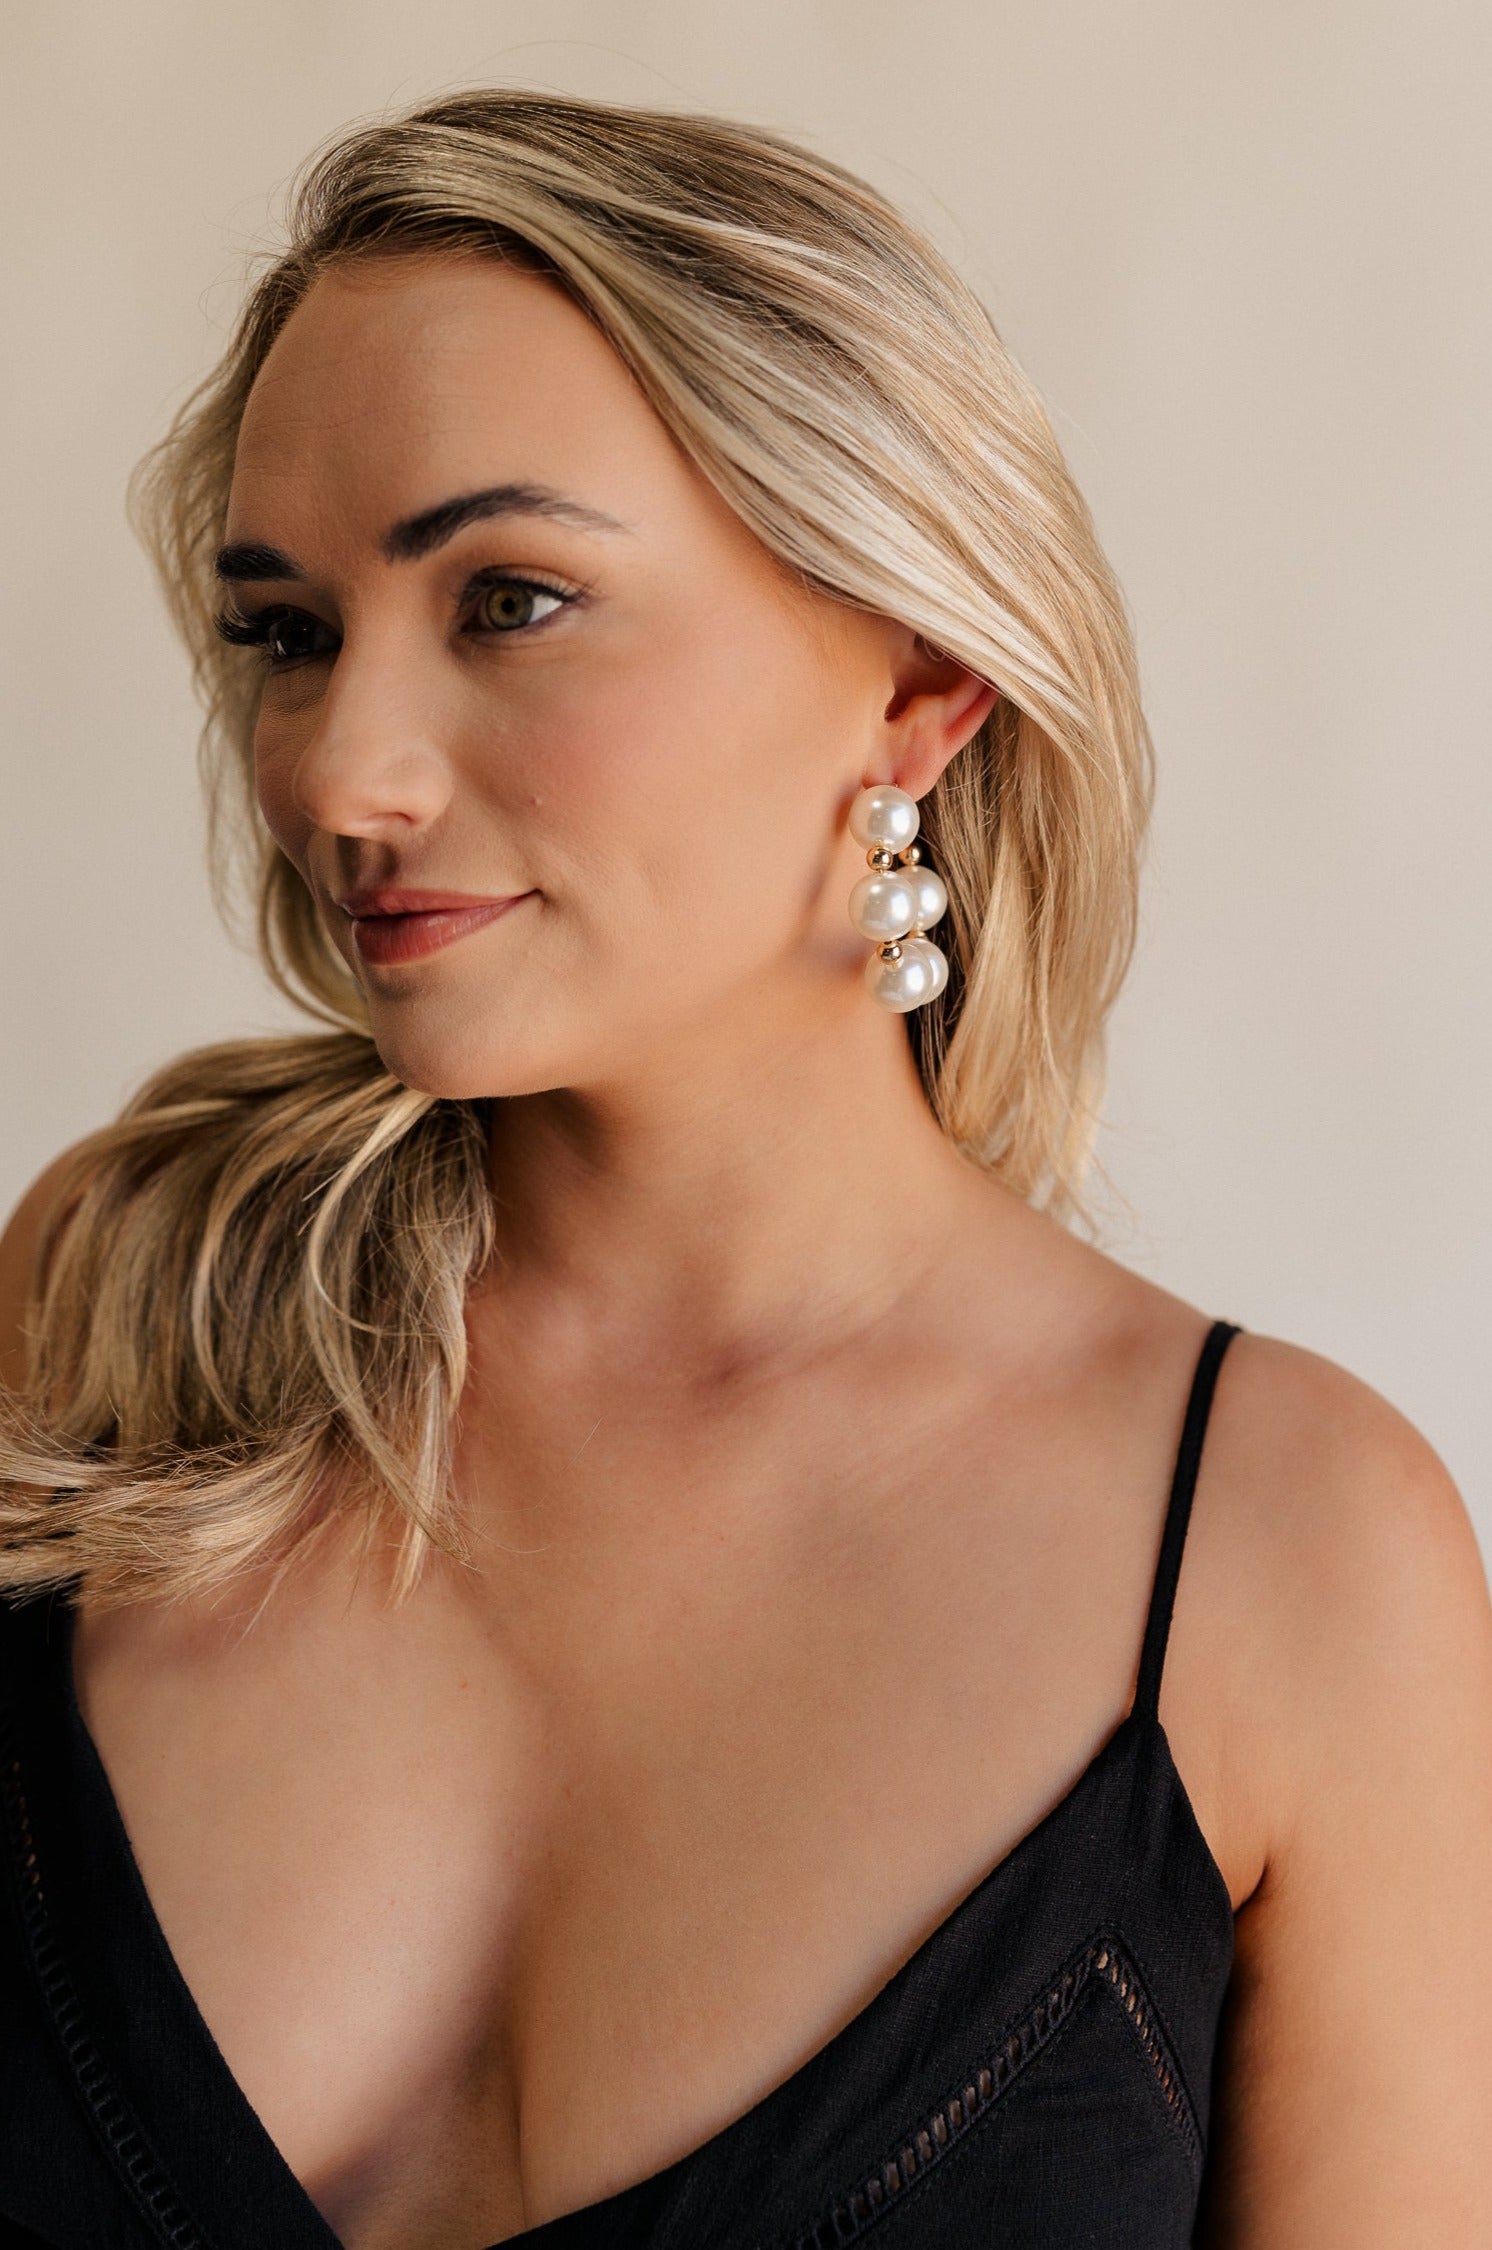 oversized pearl beads with gold details and large open hoops with back closureSide view of female model wearing the Delilah Pearl Hoop Earring which features oversized pearl beads with gold details and large open hoops with back closure